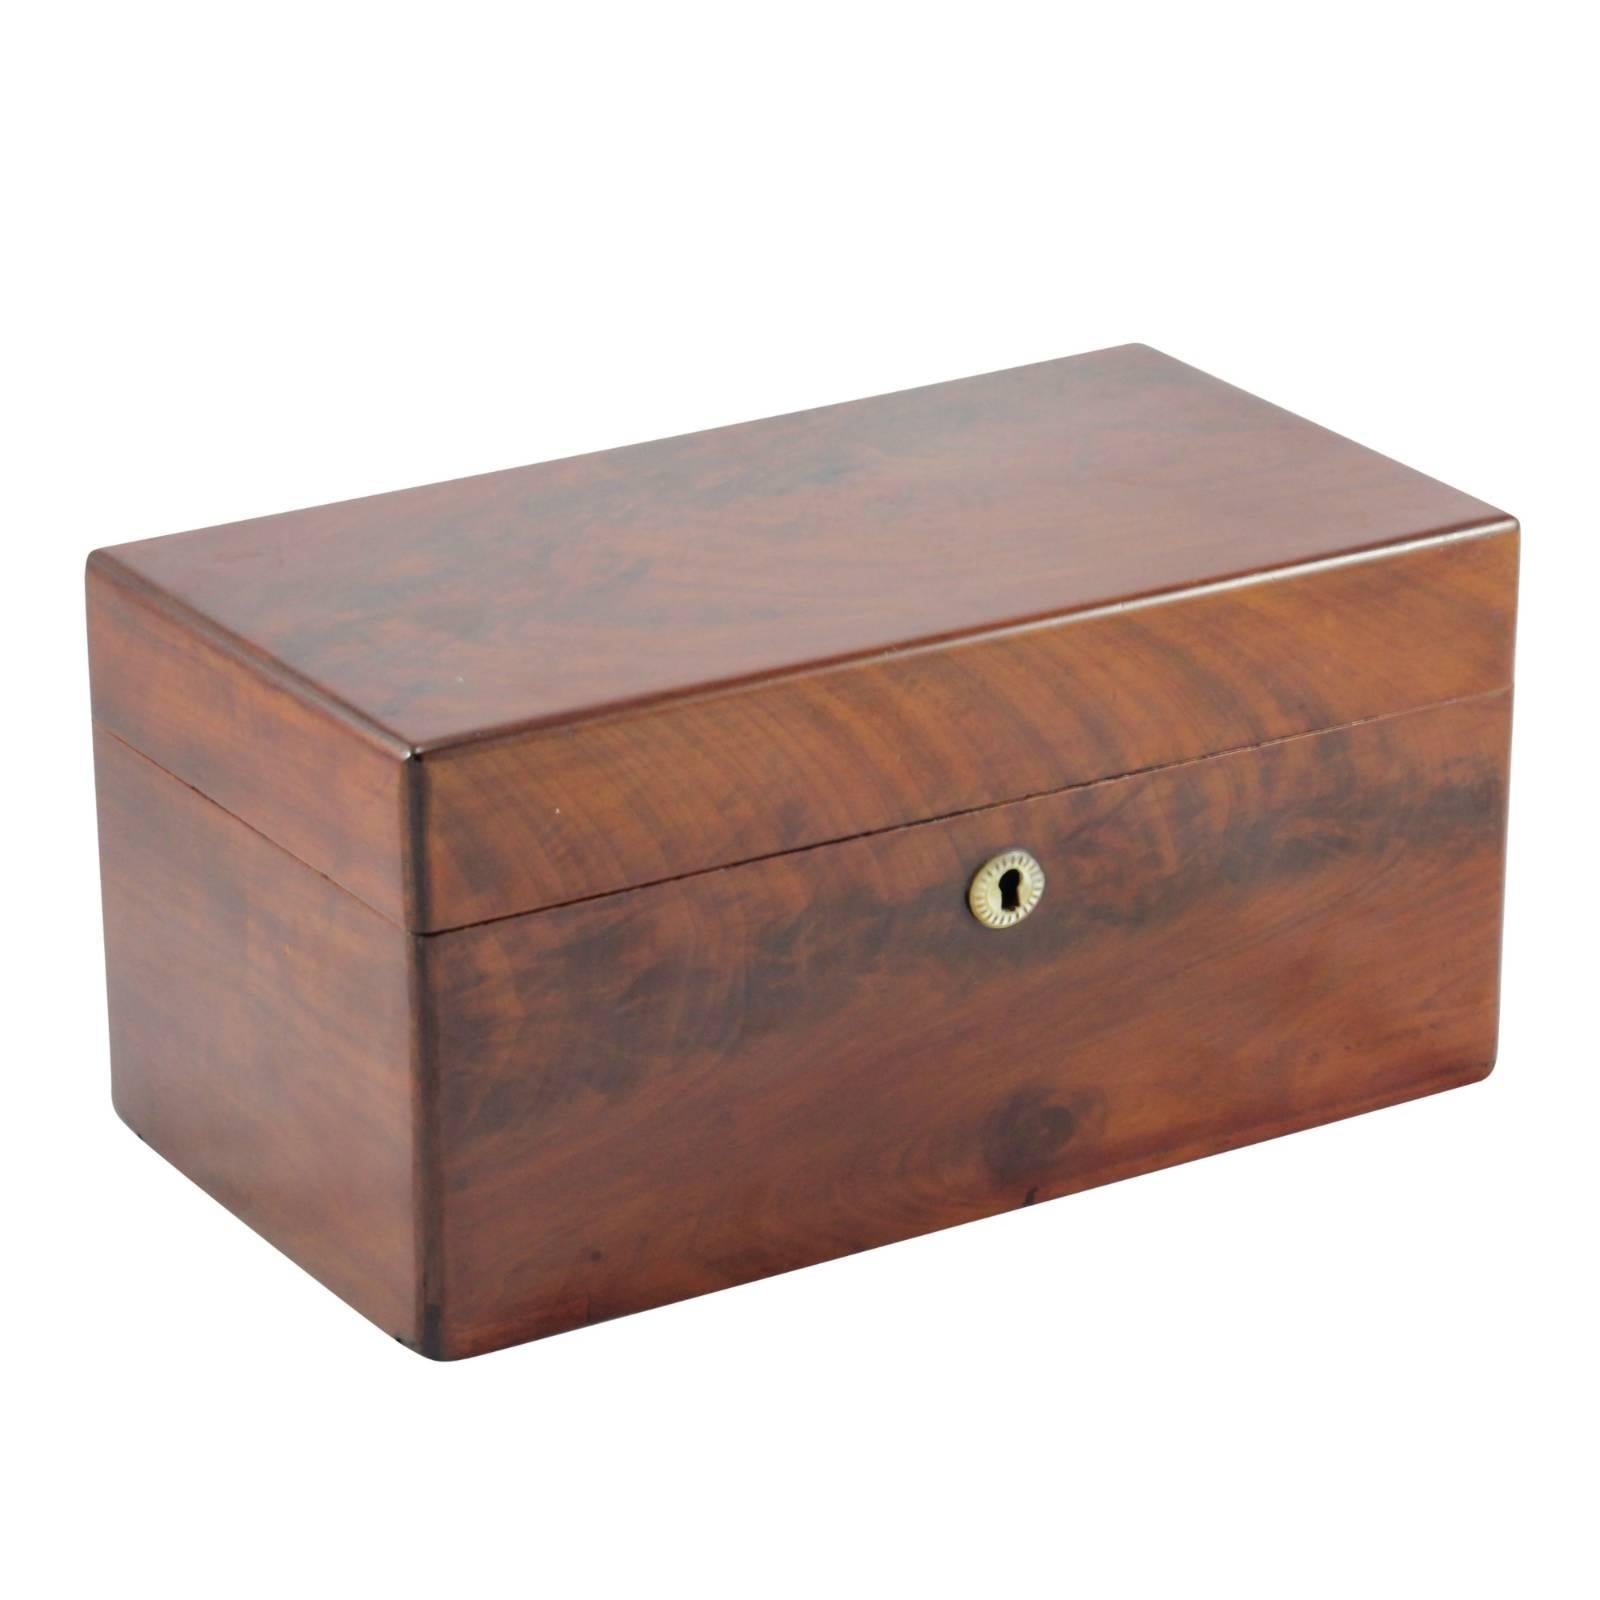 This rosewood tea caddy contains two removable compartments for loose tea with hinged lids. It also contains a later pressed amber glass mixing bowl. The outer box features a mother-of-pearl escutcheon but has no key. The bottom of the box has a lot